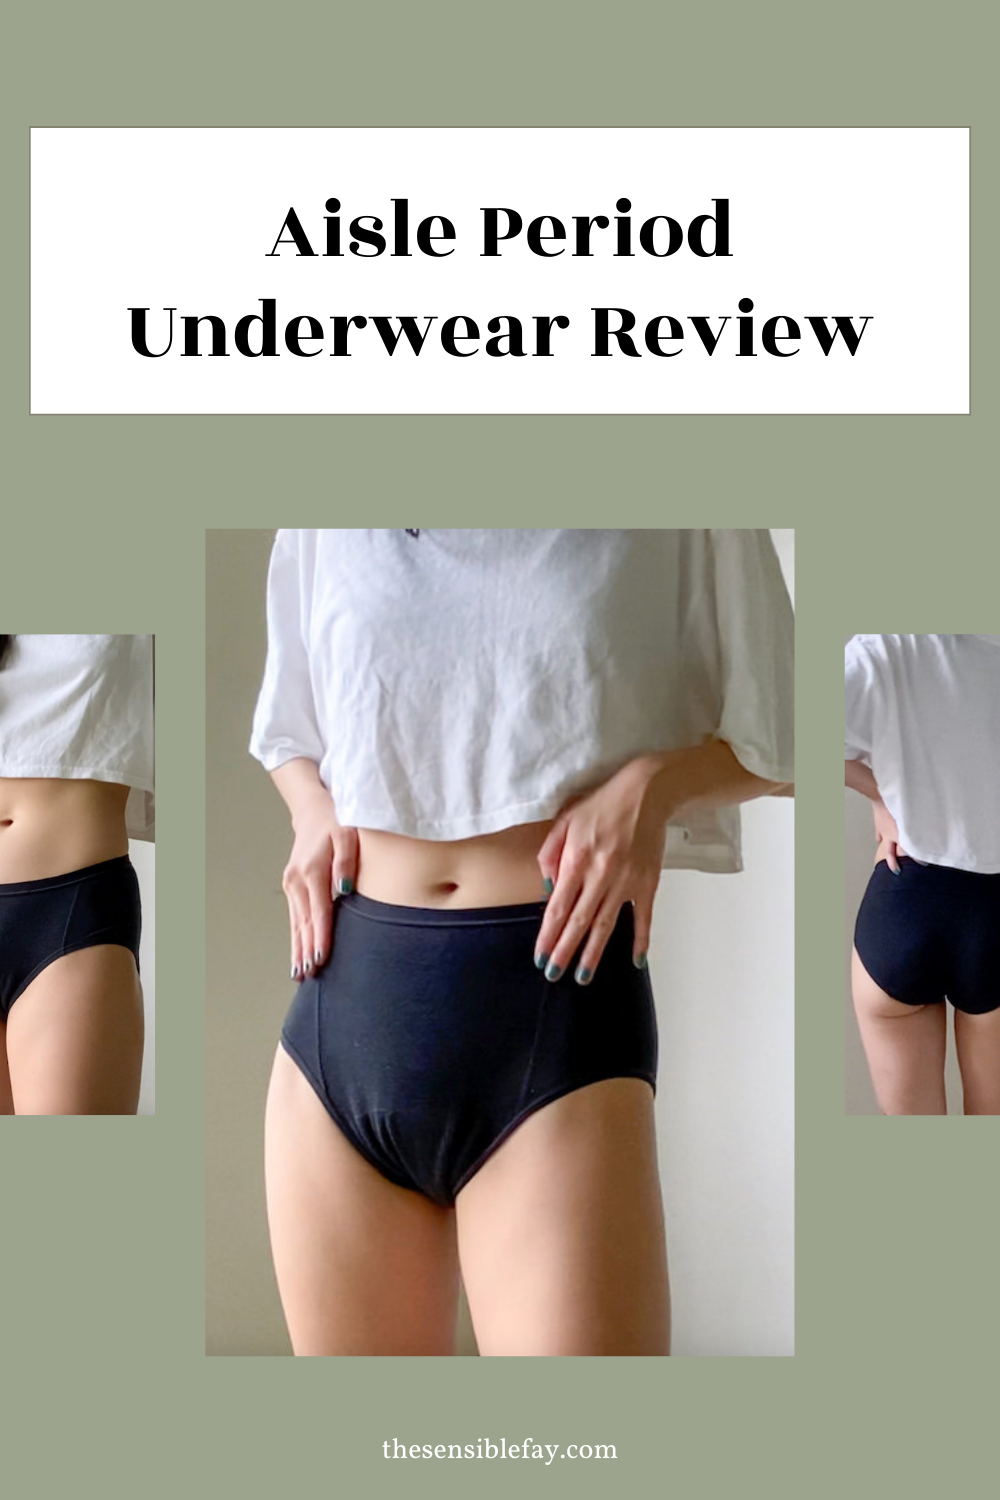 Finding the Perfect Fit: About the Aisle Undies